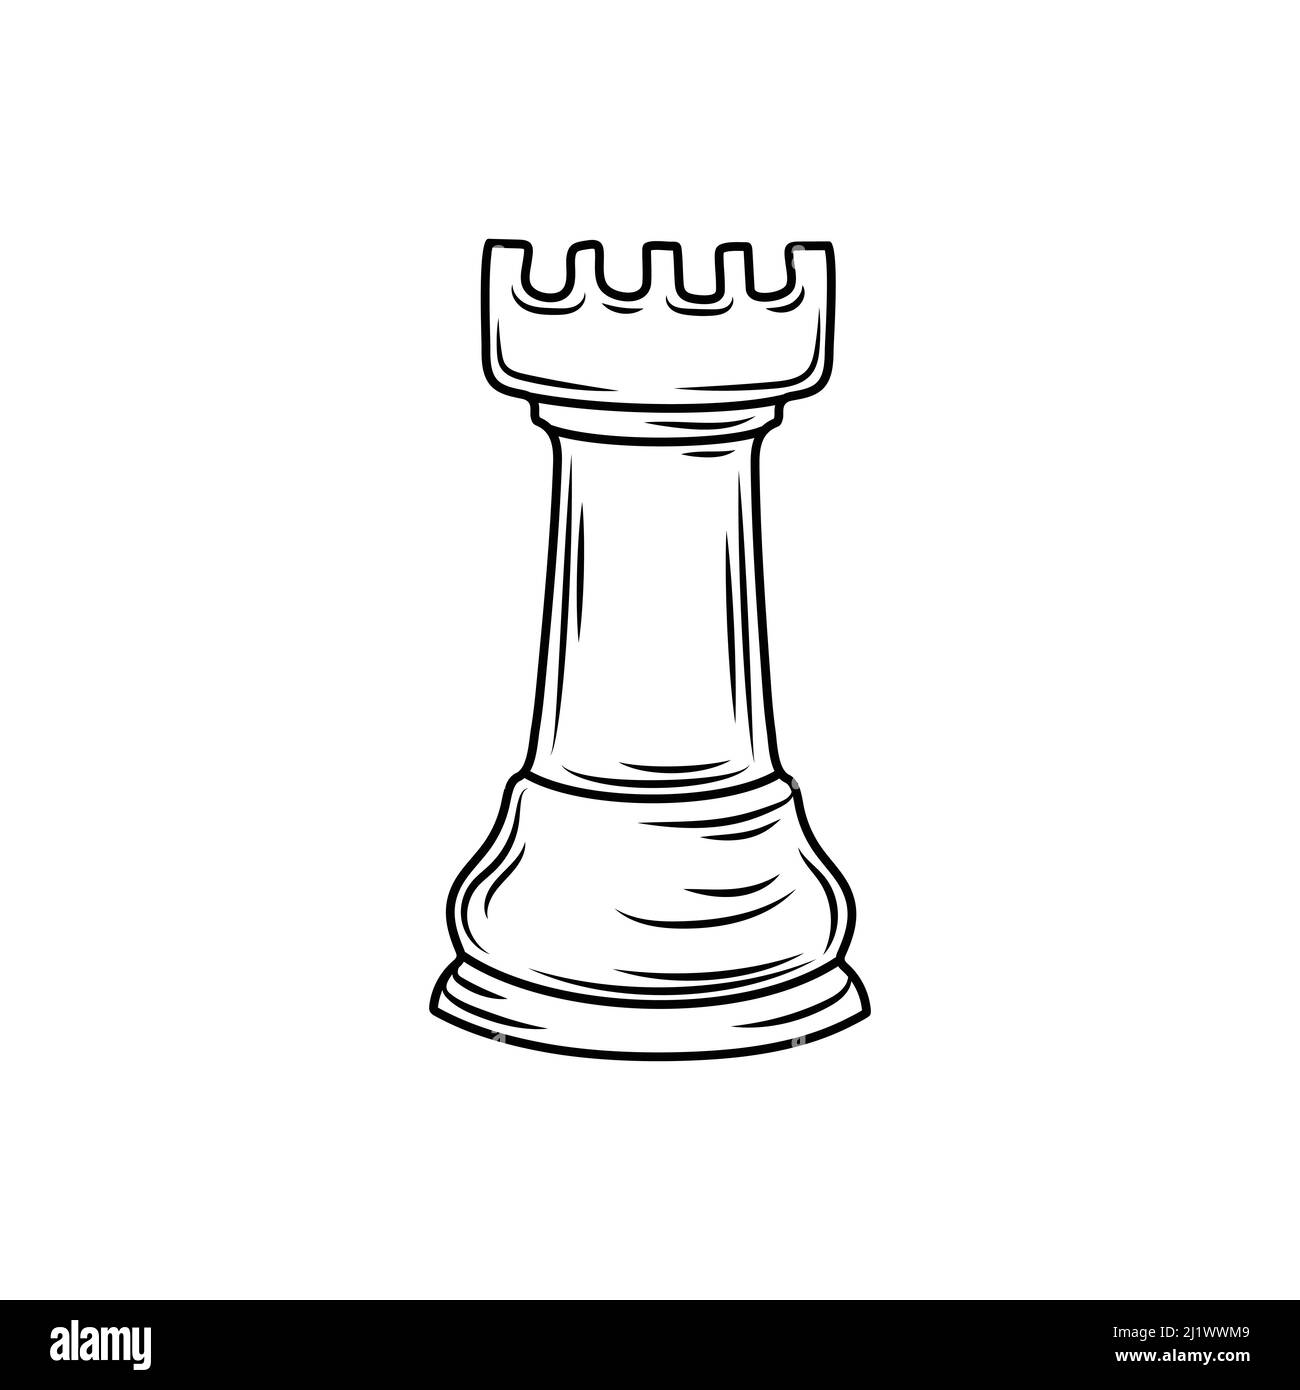 Play Chess Stock Illustrations – 34,724 Play Chess Stock